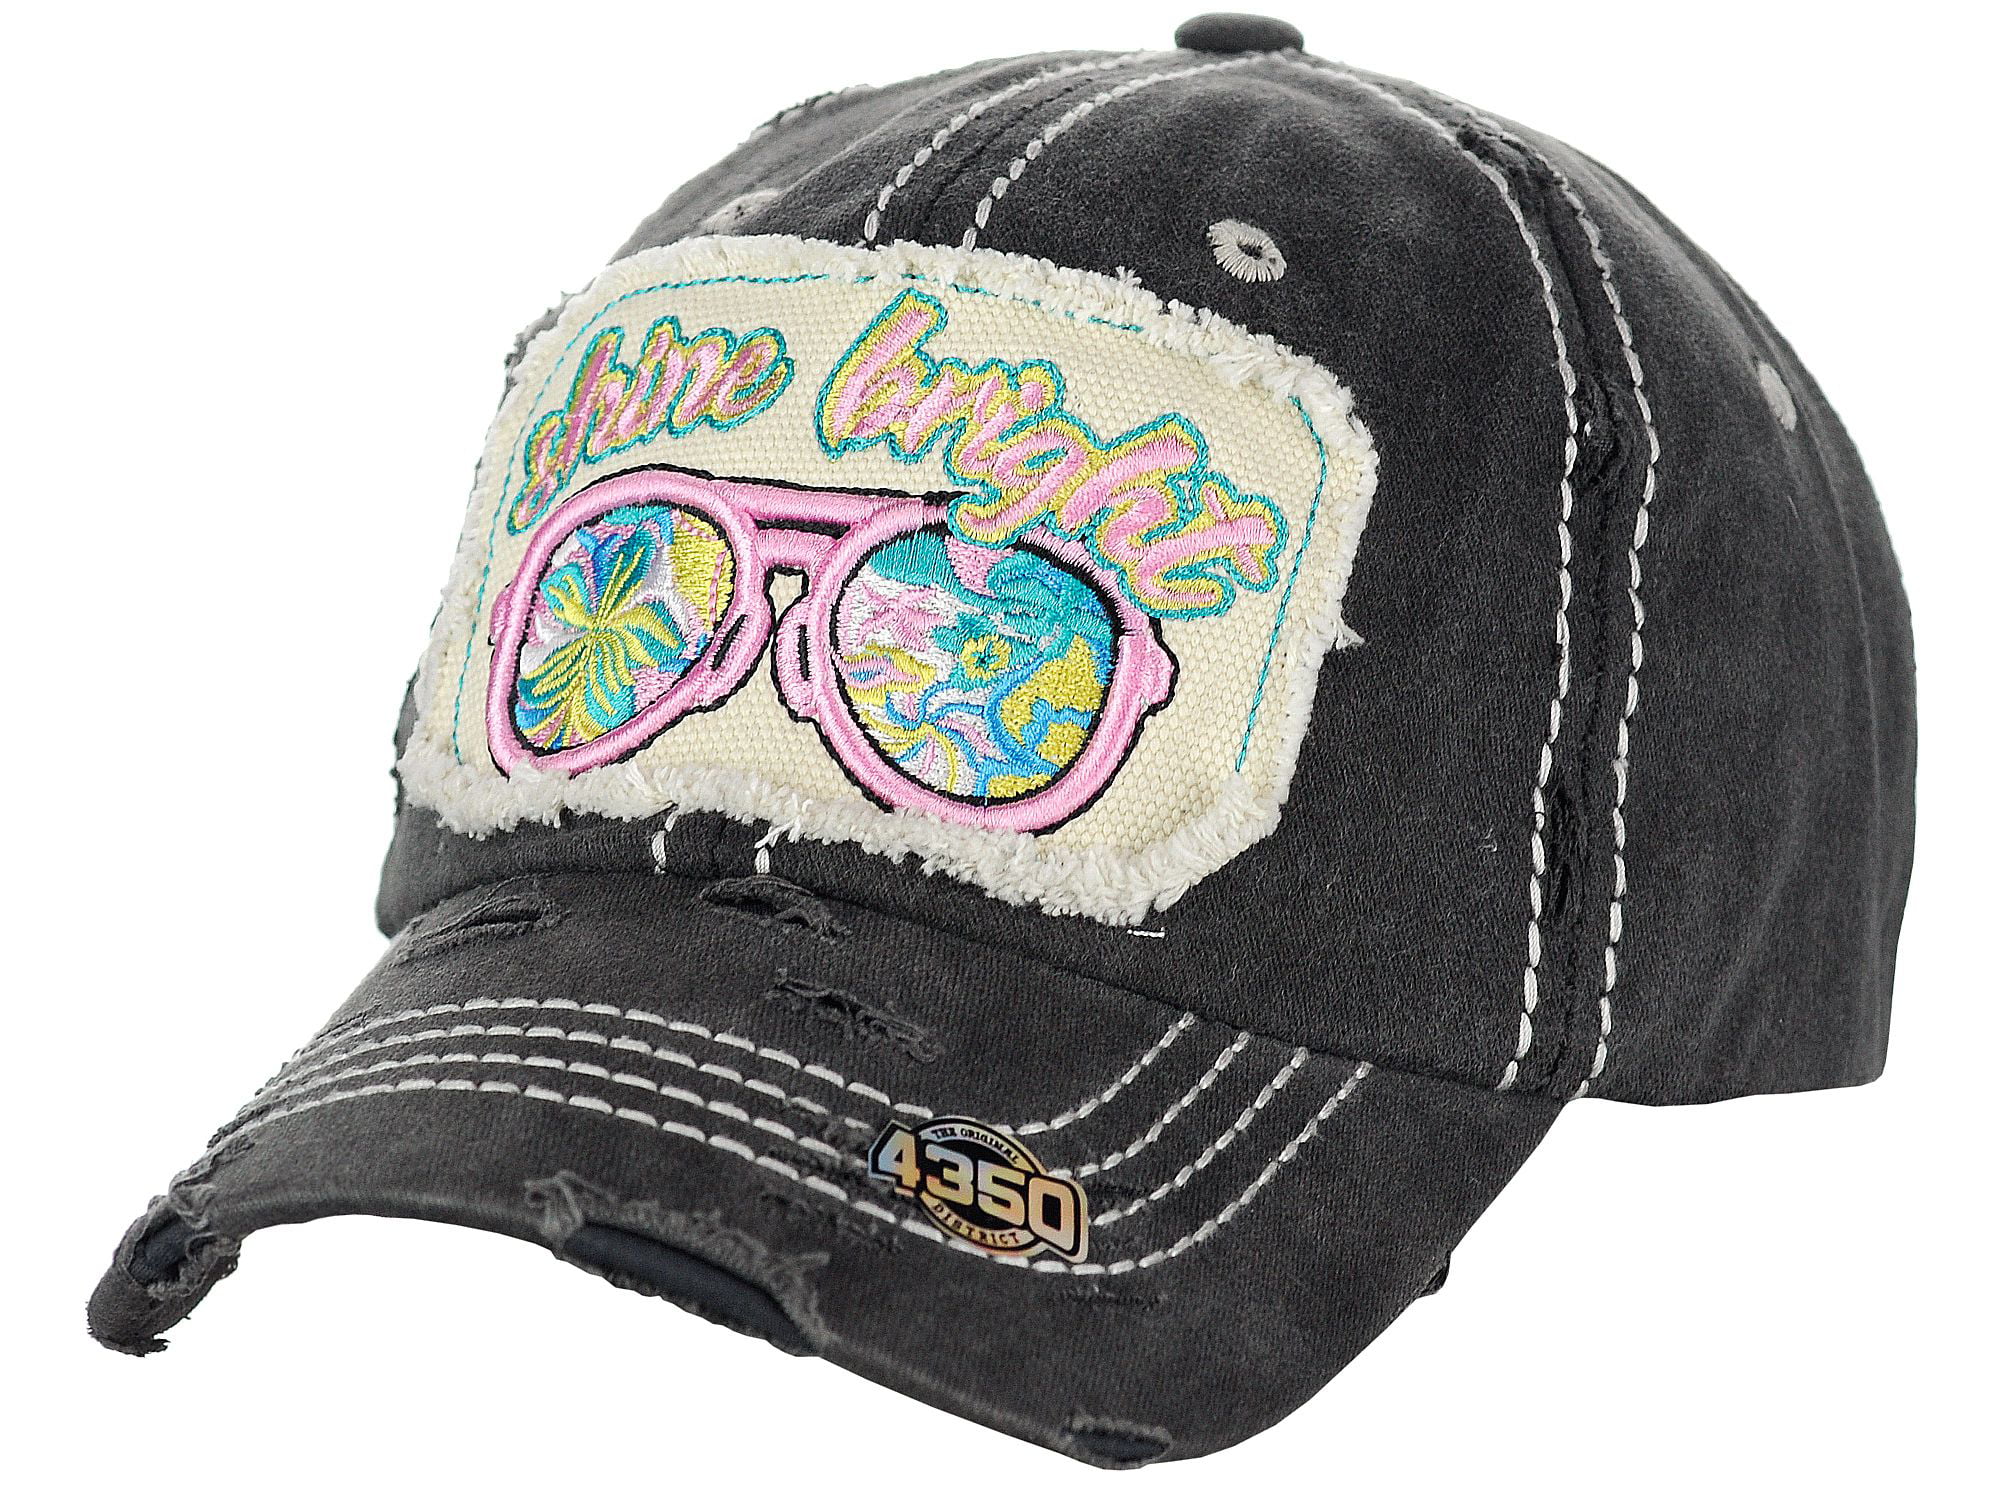 CC Embroidered Adjustable Ball Cap Hat "GOOD VIBES" OS Fits Most